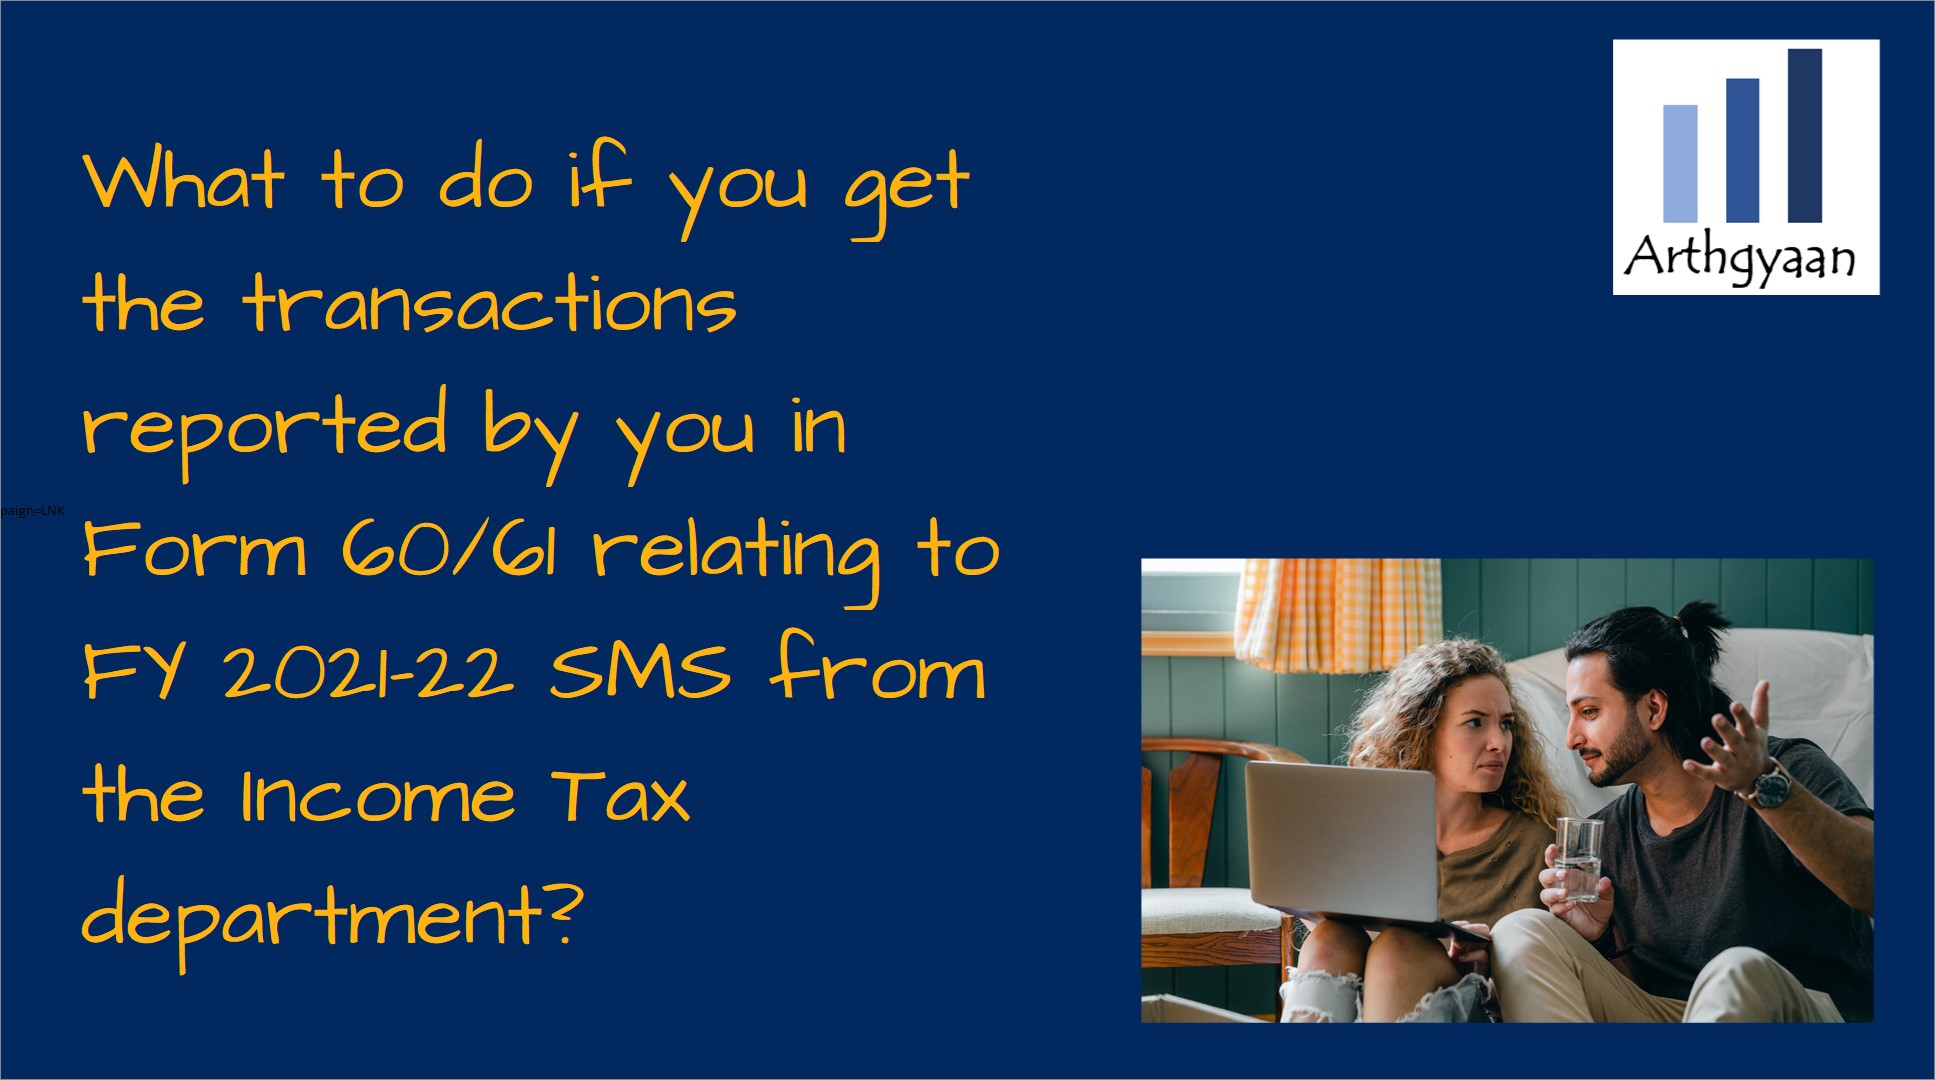 What to do if you get the transactions reported by you in Form 60/61 relating to FY 2021-22 SMS from the Income Tax department?